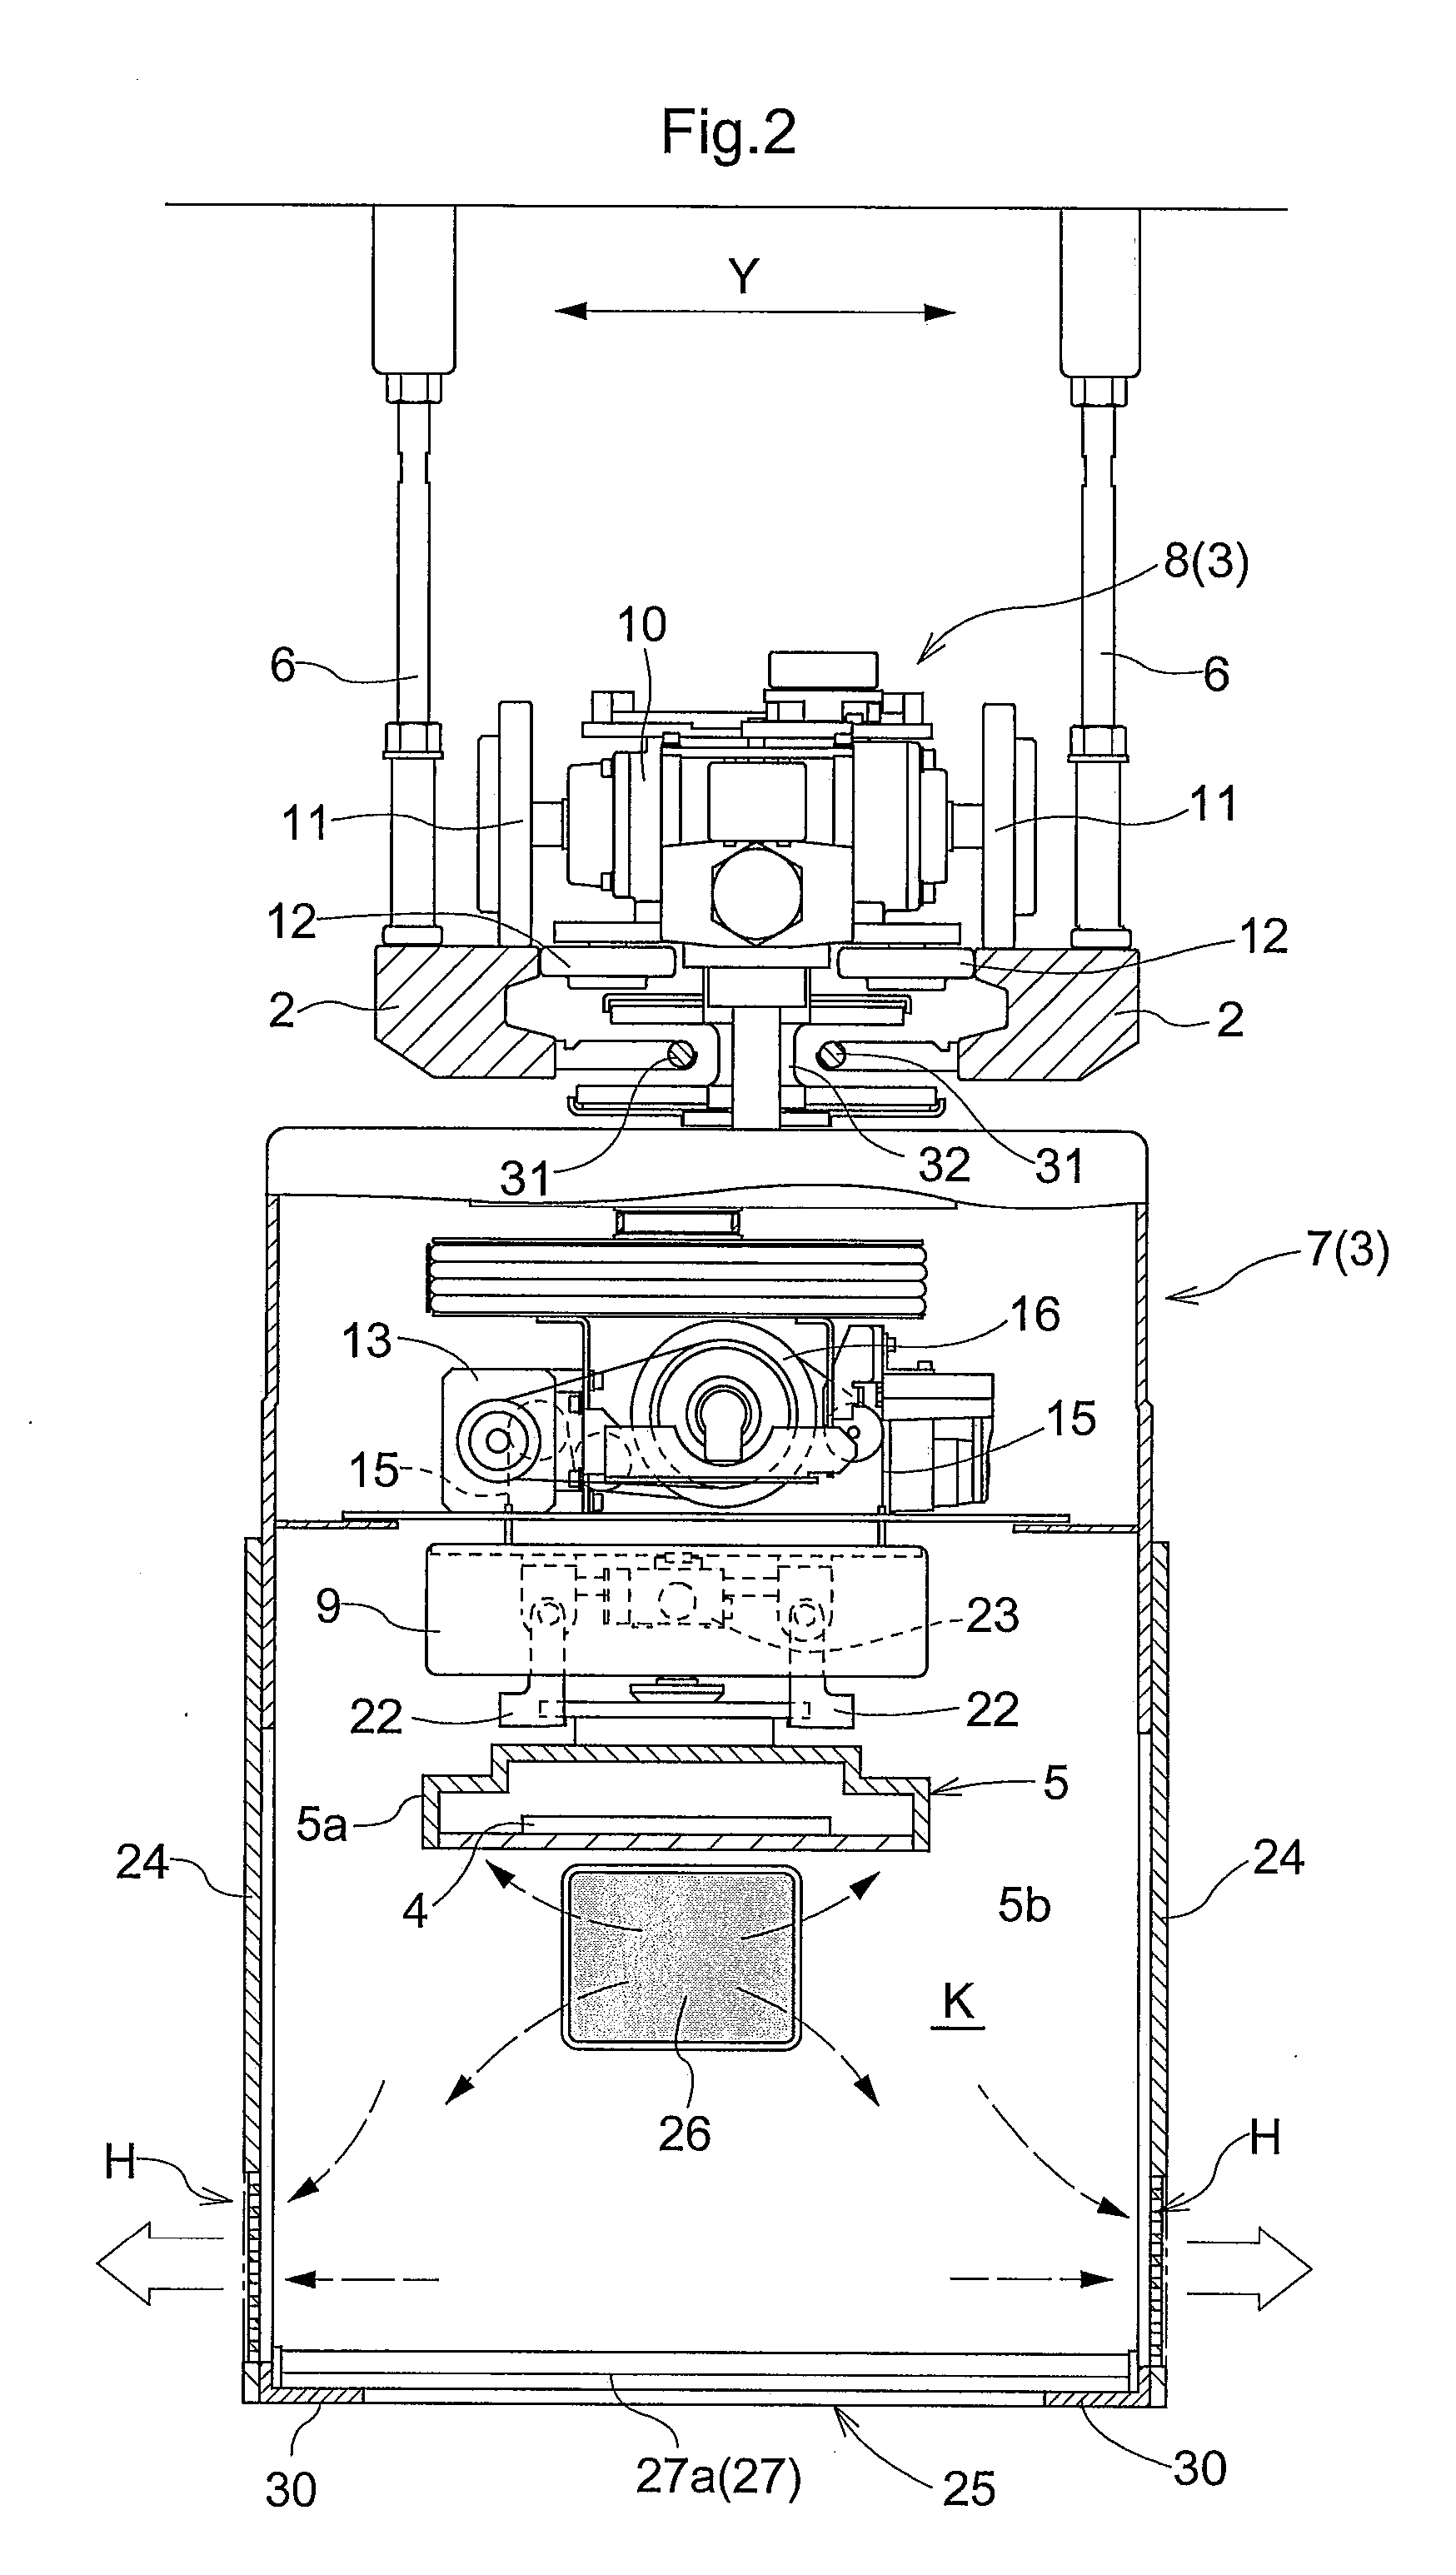 Article Transport Device